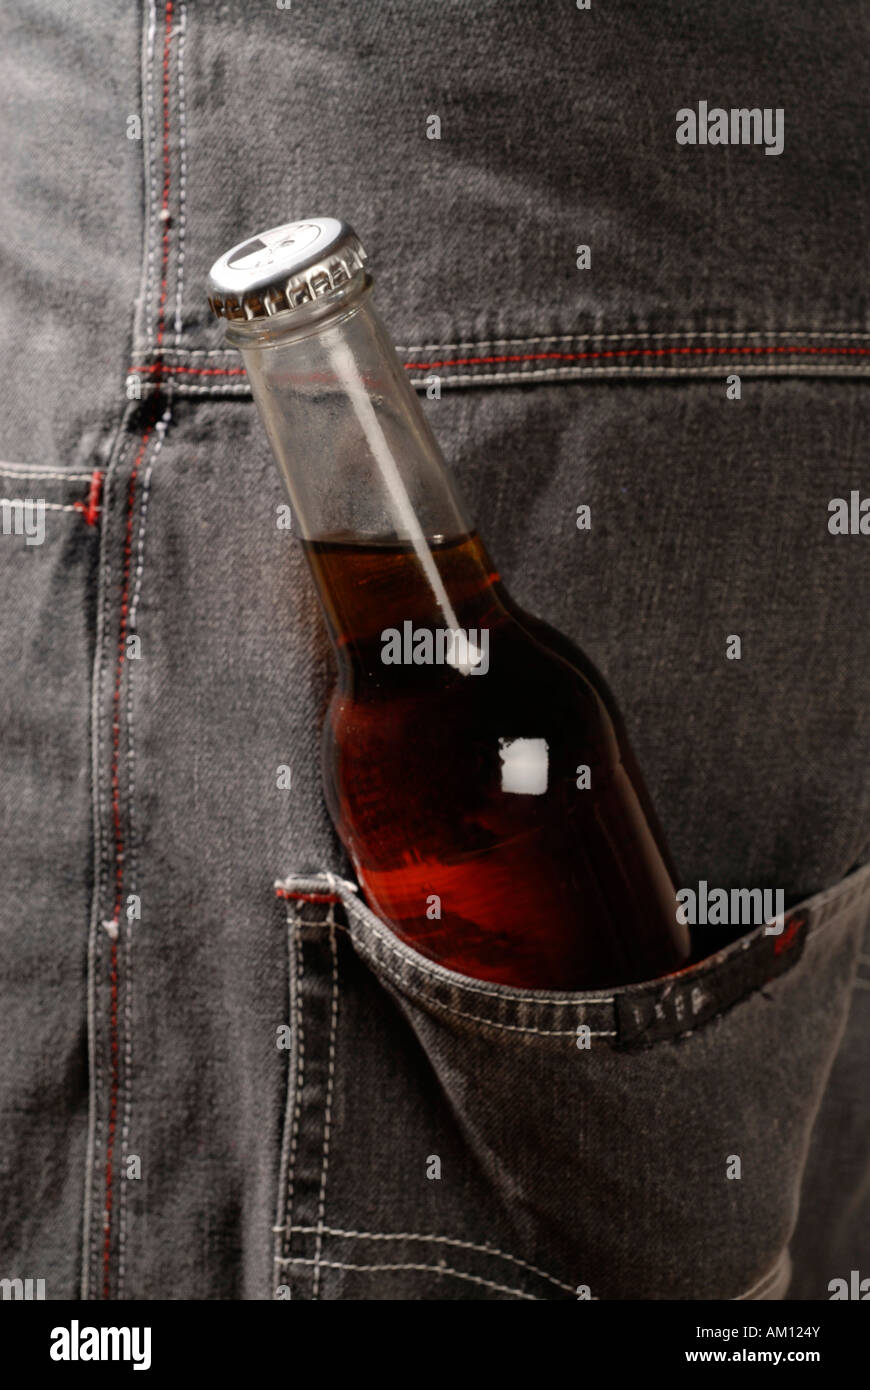 Bottle with alcohol in a pocket Stock Photo